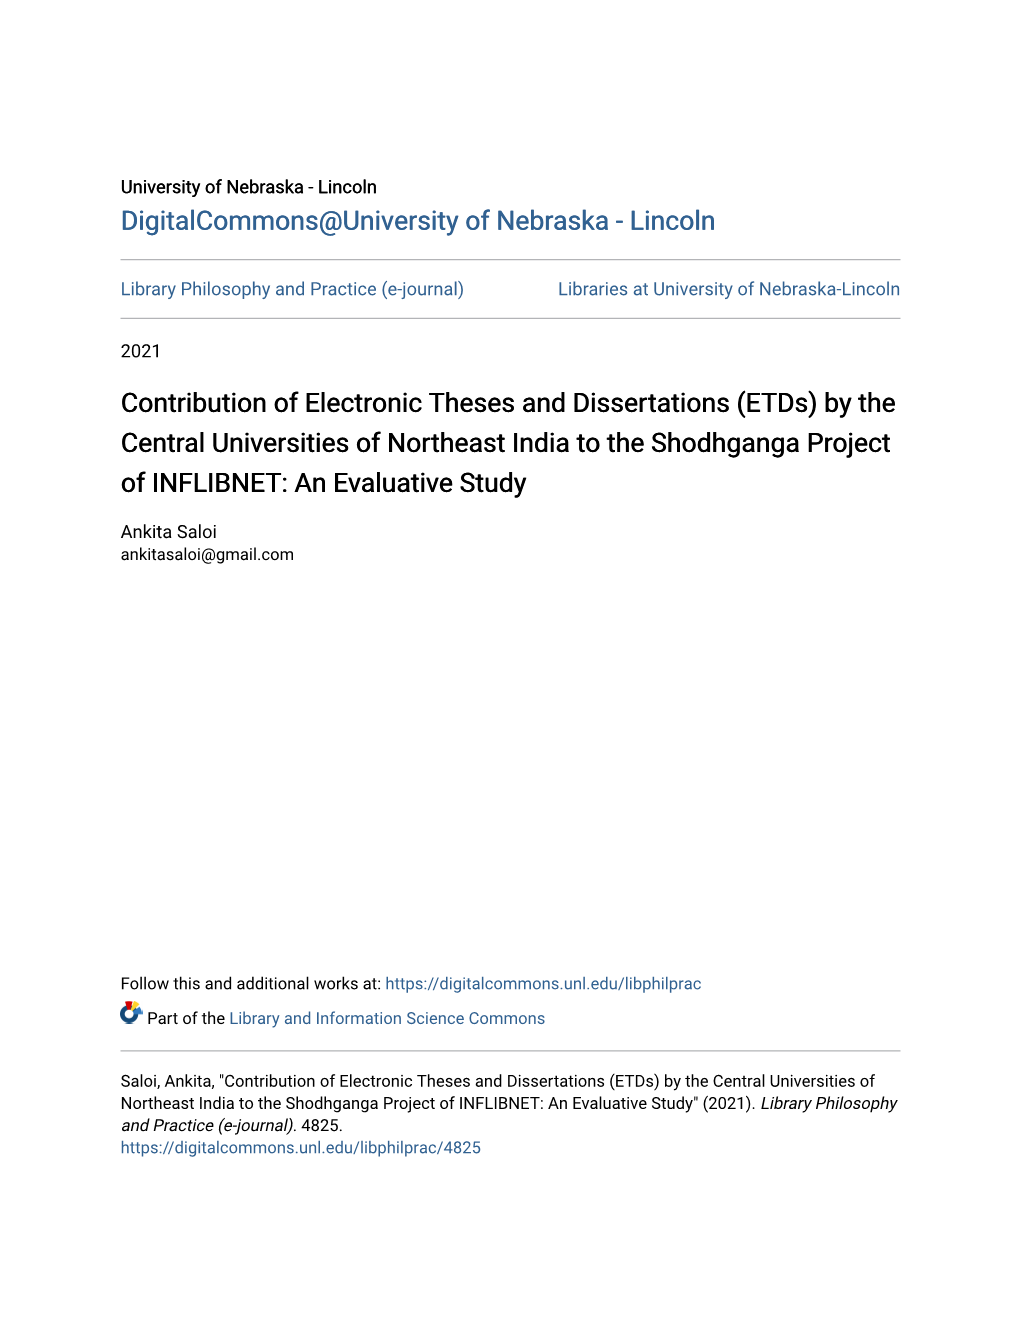 Contribution of Electronic Theses and Dissertations (Etds) by the Central Universities of Northeast India to the Shodhganga Project of INFLIBNET: an Evaluative Study